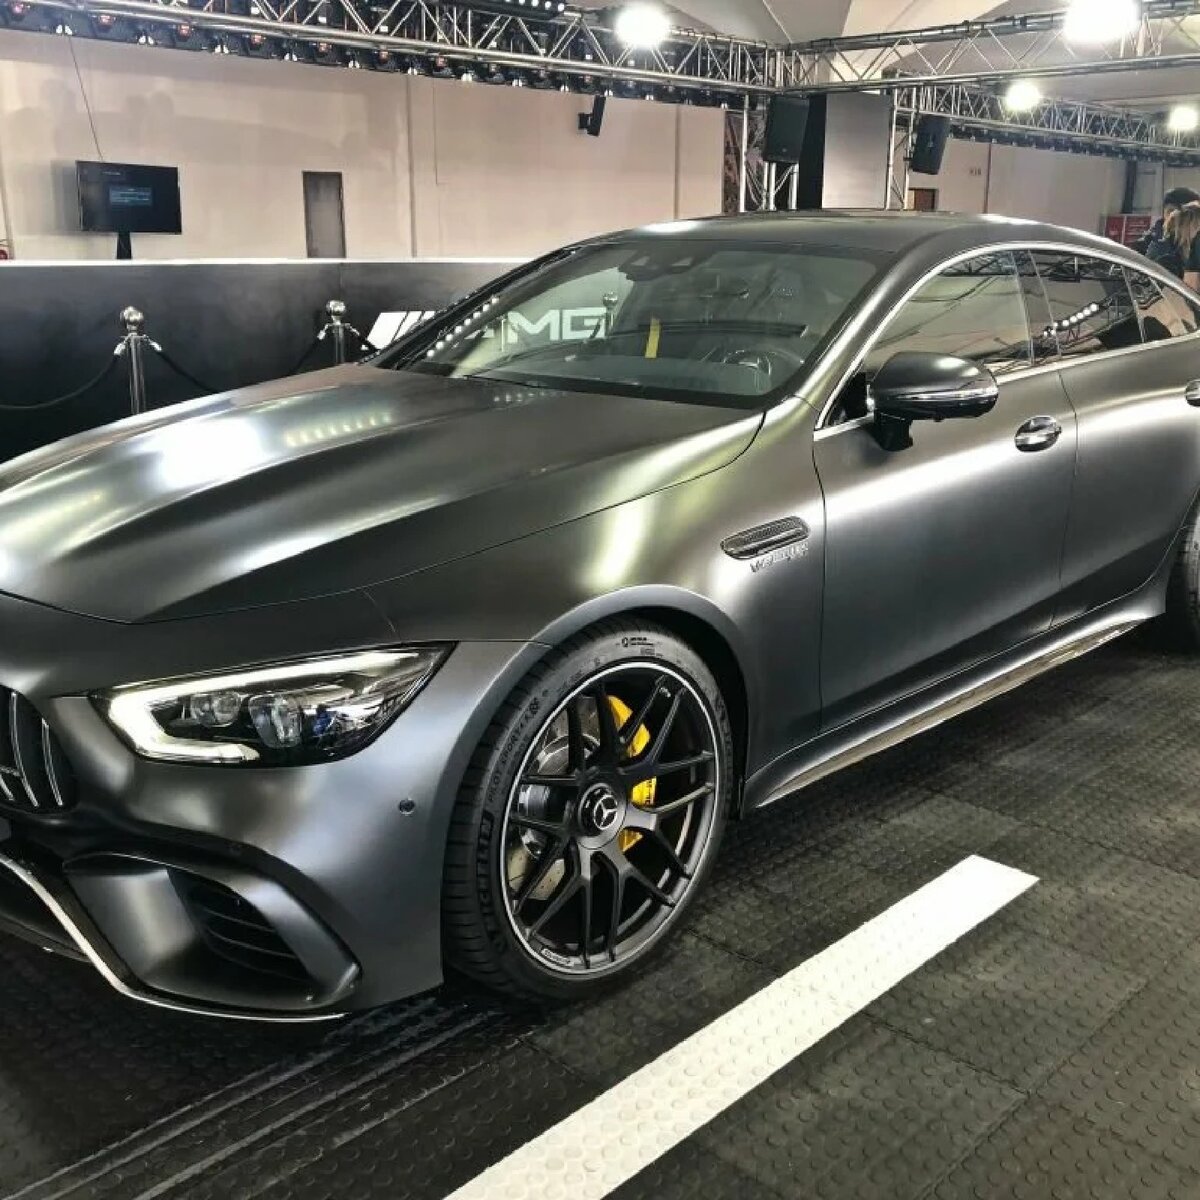 Gt 63. Mercedes AMG gt 63 s. Мерседес AMG gt 63s. Mercedes AMG gt 63s Coupe. Mercedes AMG gt 63 se.